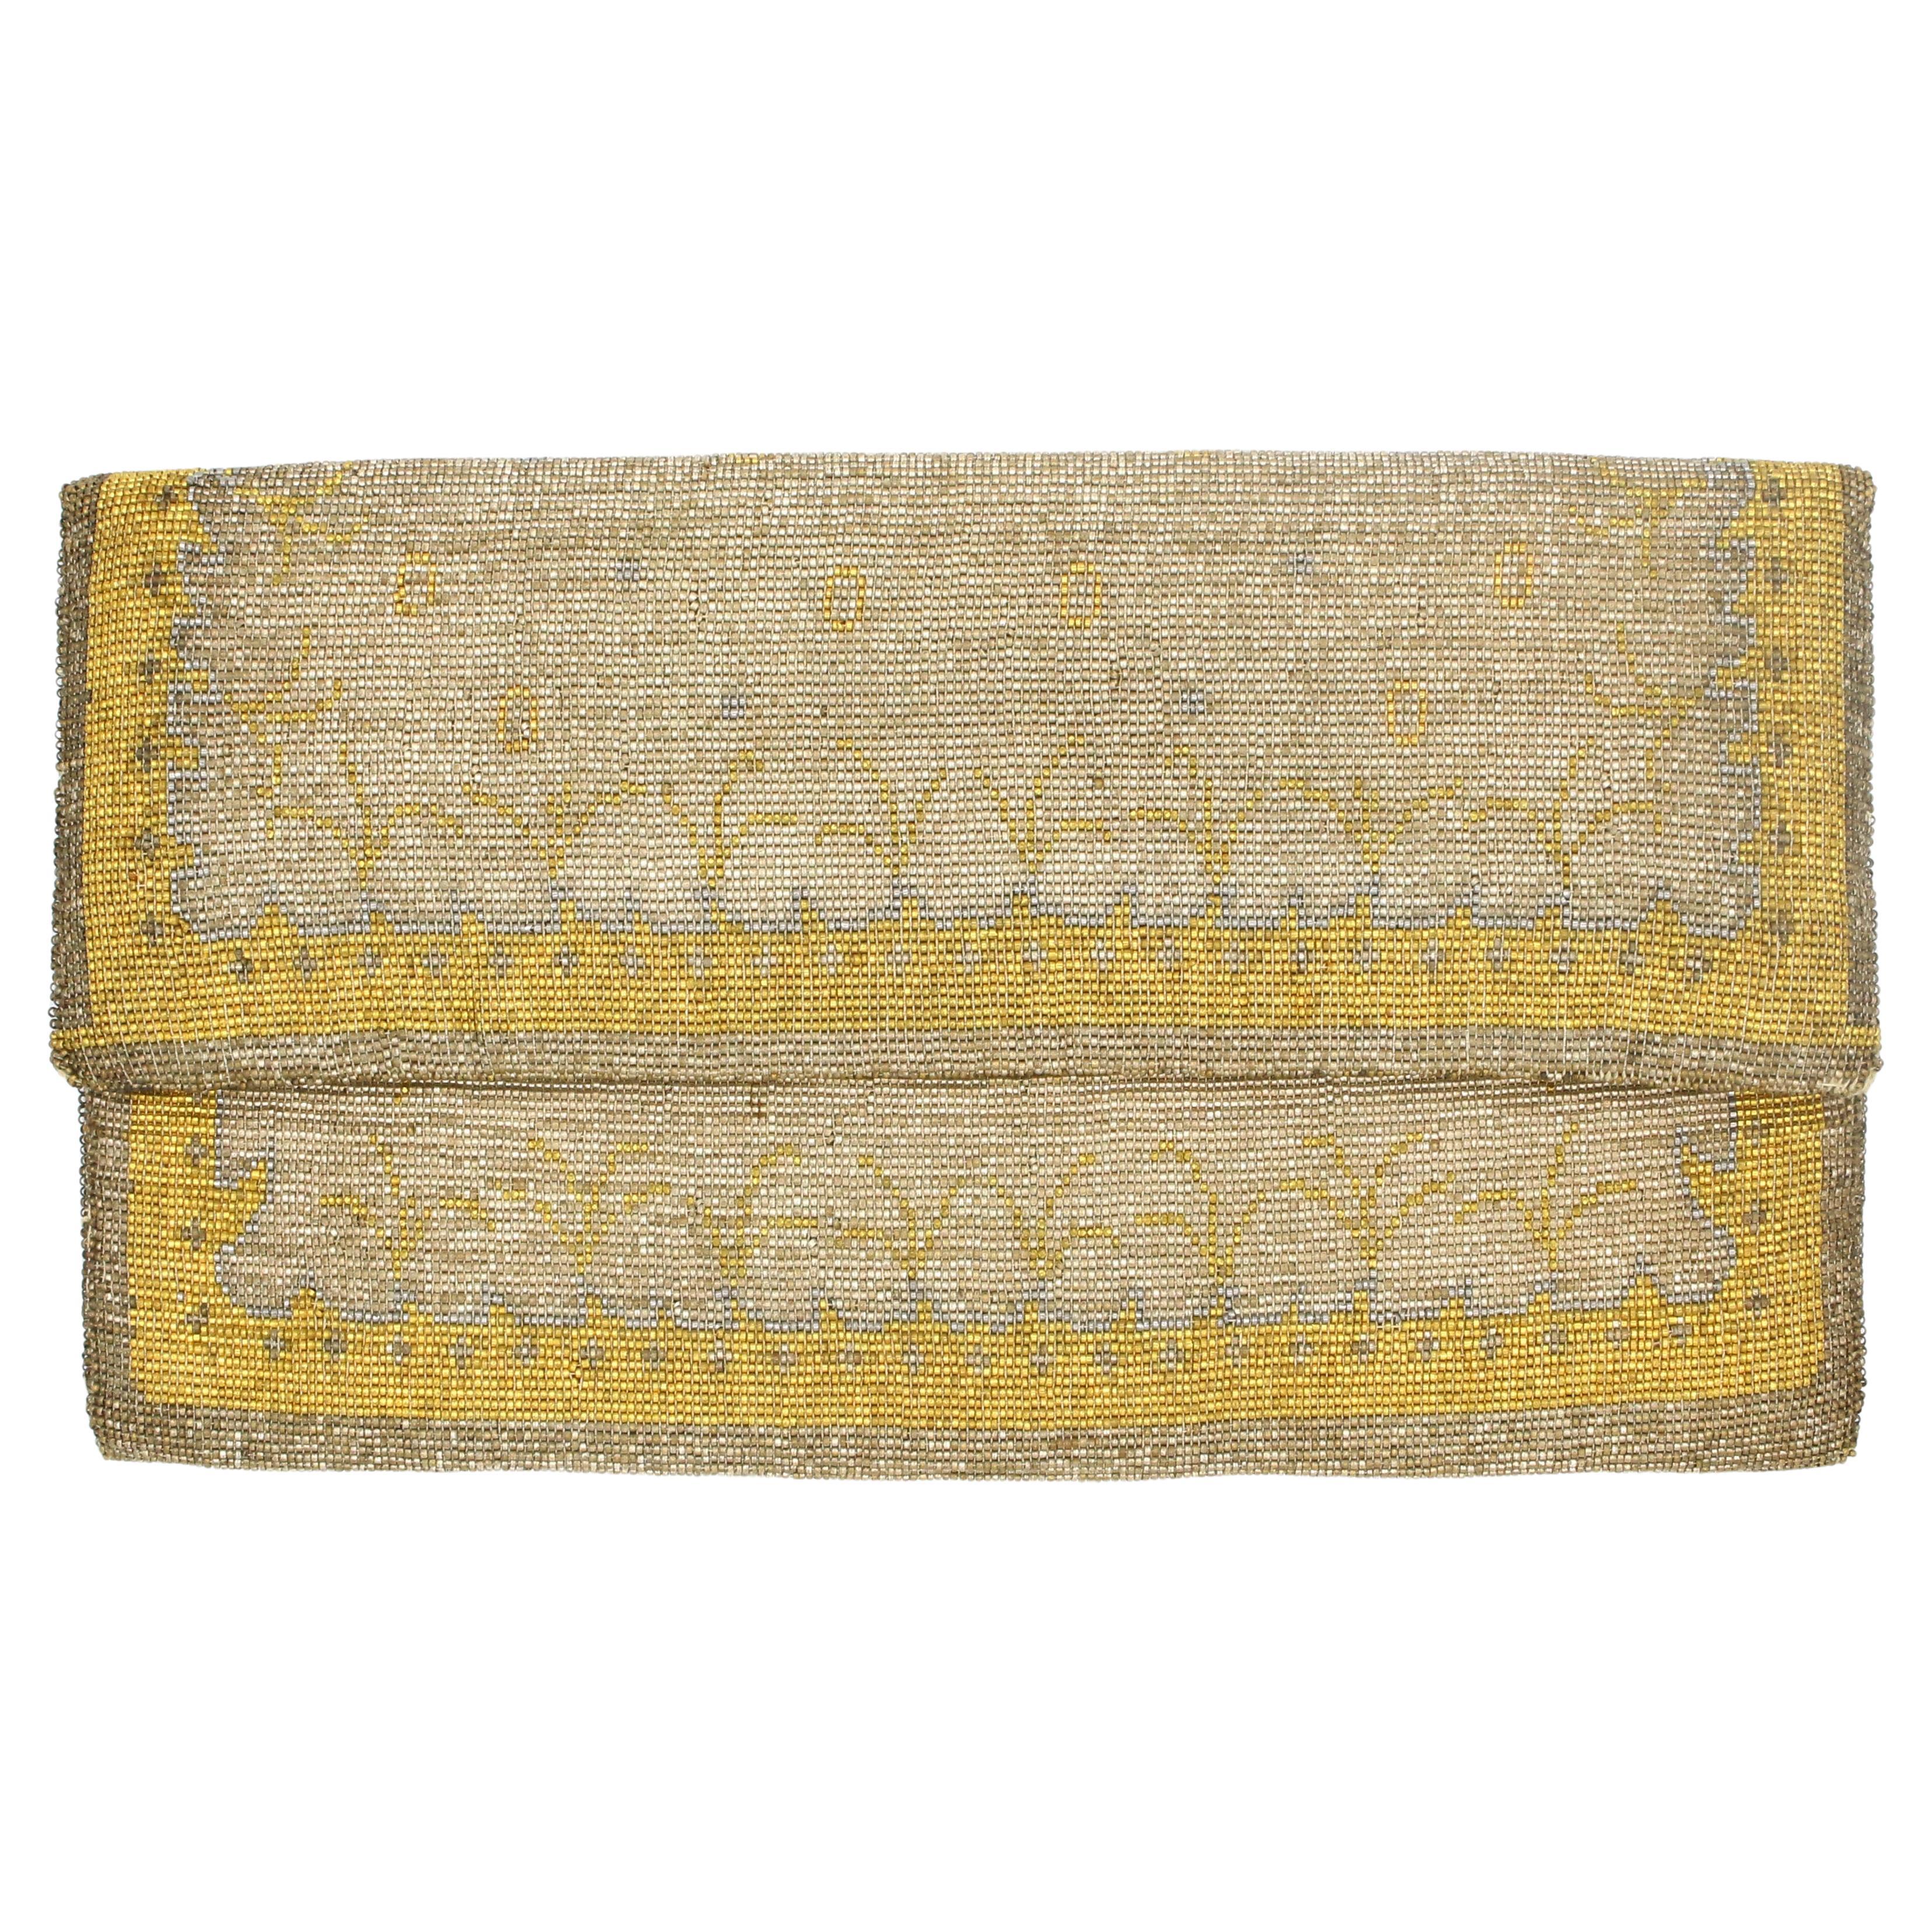 Circa 1950s Evening Clutch by Cribout of Paris For Sale